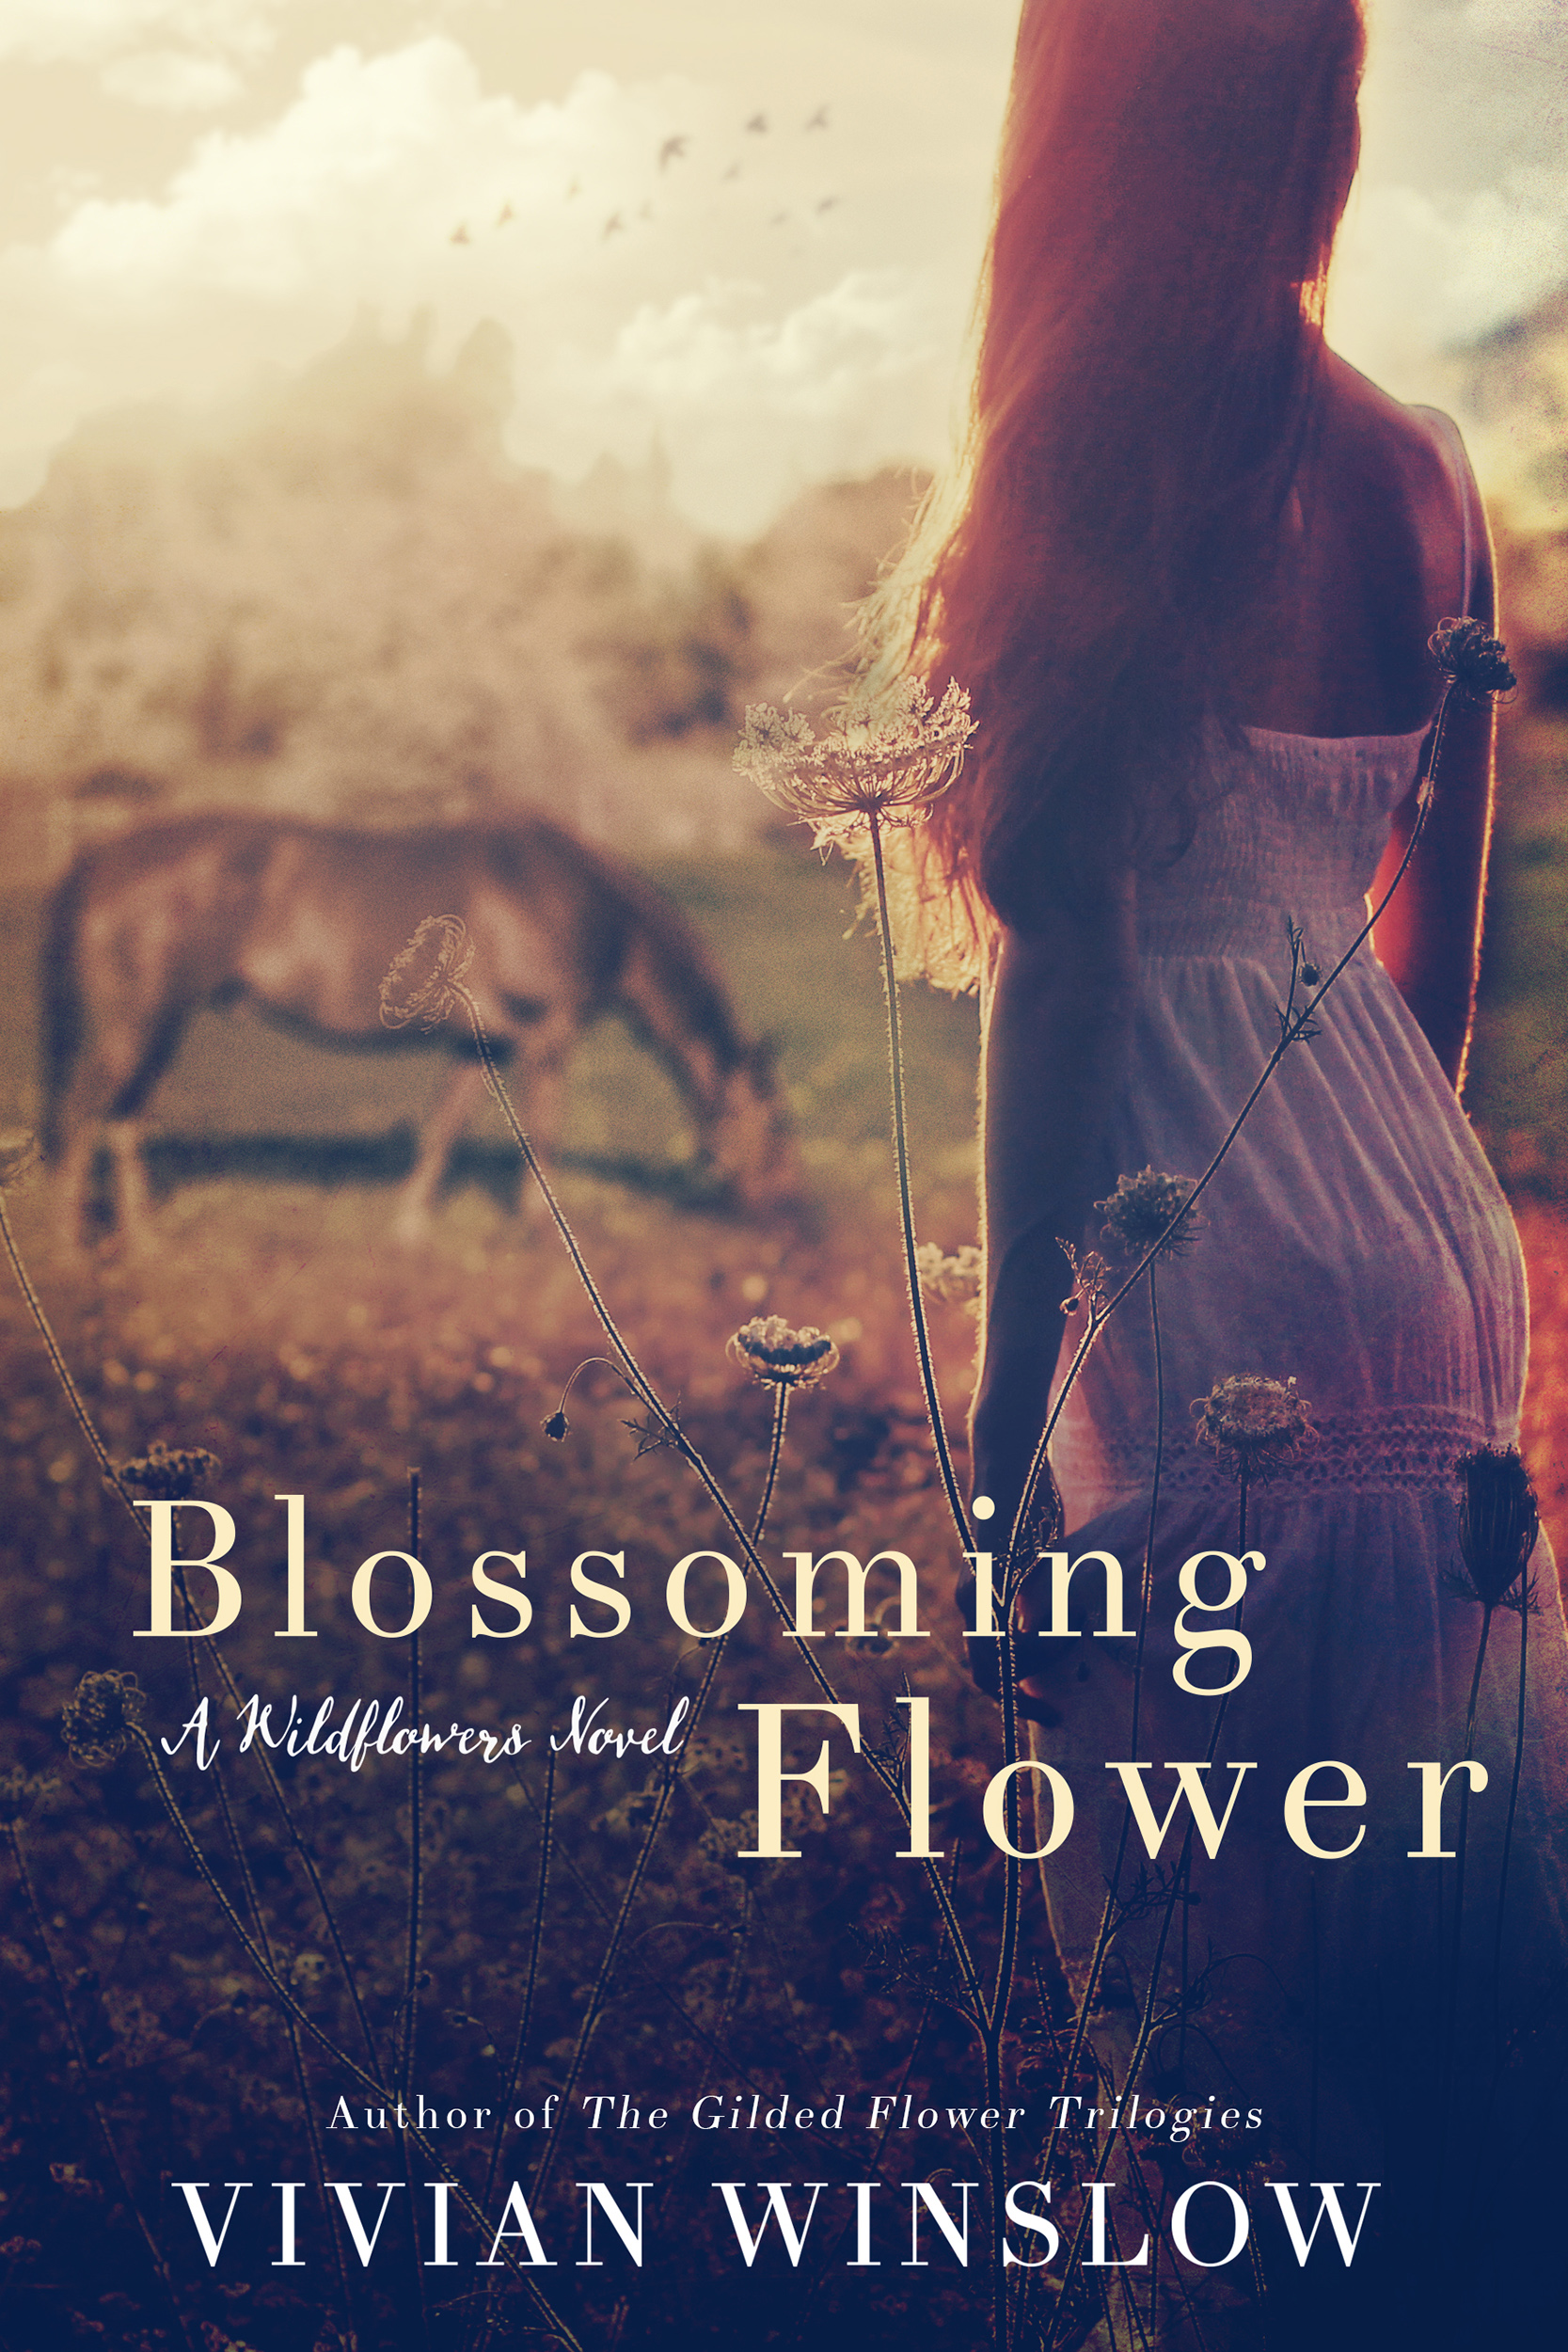 FREE: Blossoming Flower by Vivian Winslow